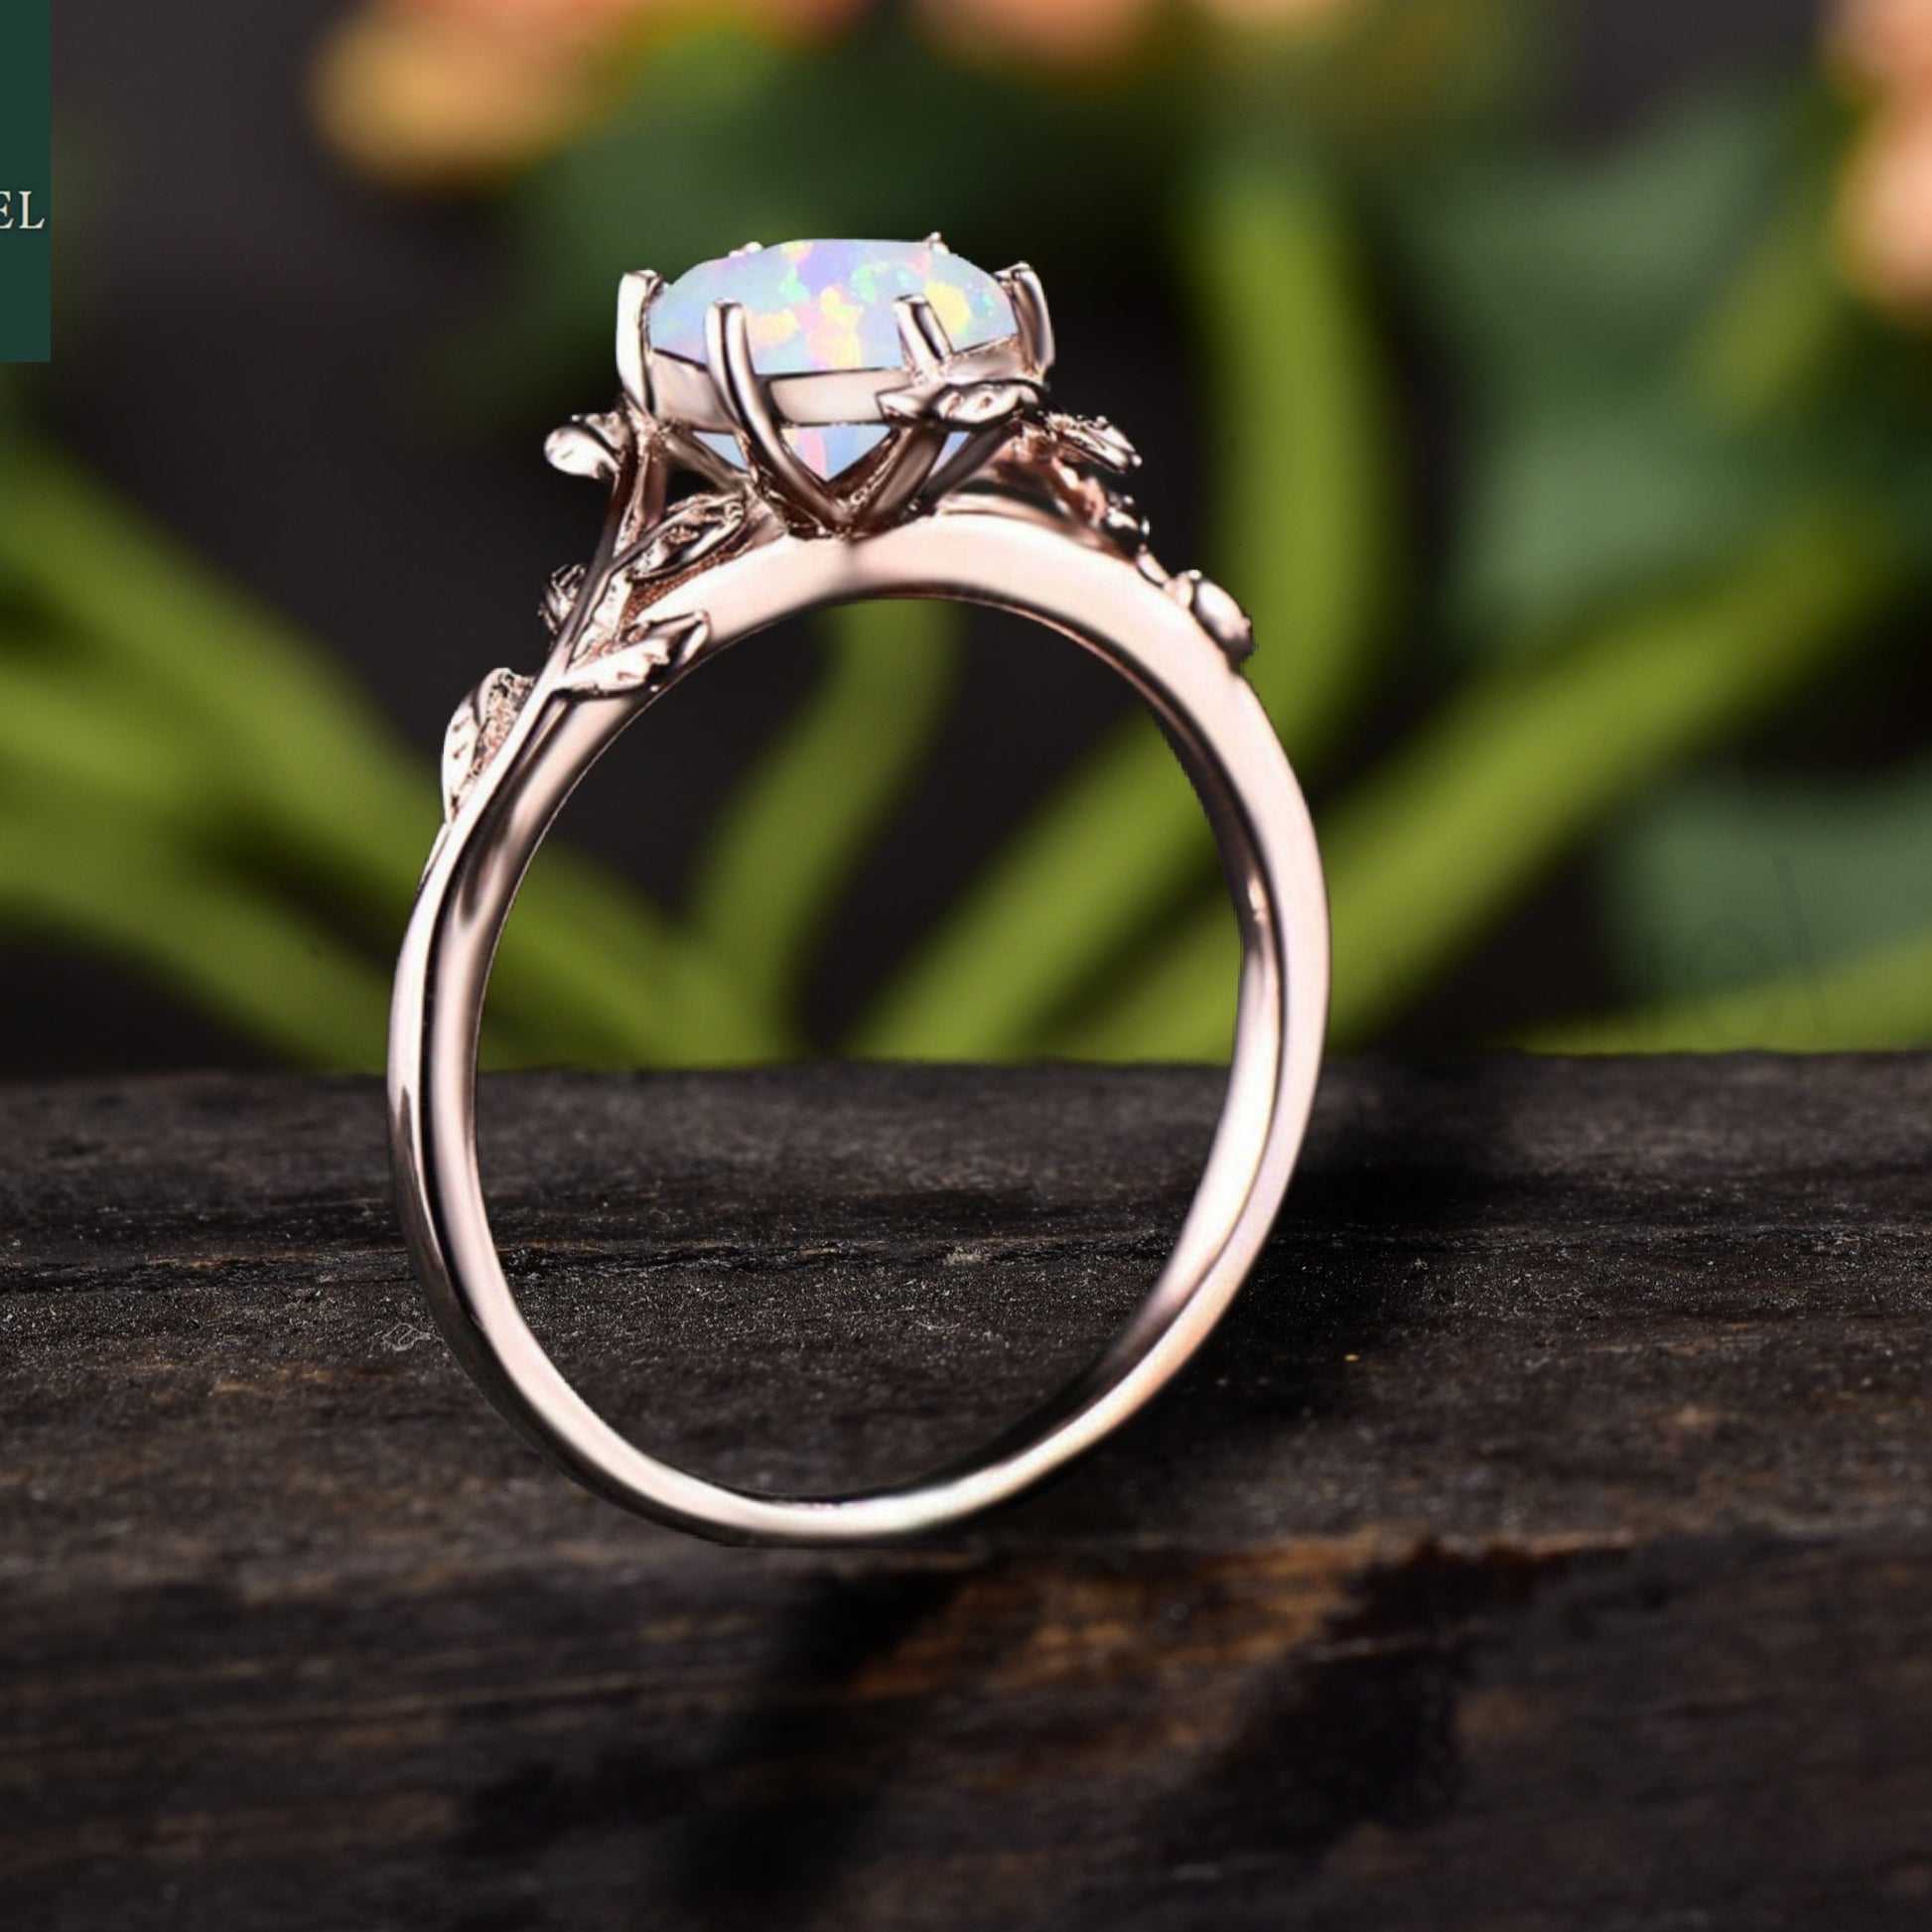 Hexagon Cut Fire Opal Natural Inspired Leaf Engagement Ring